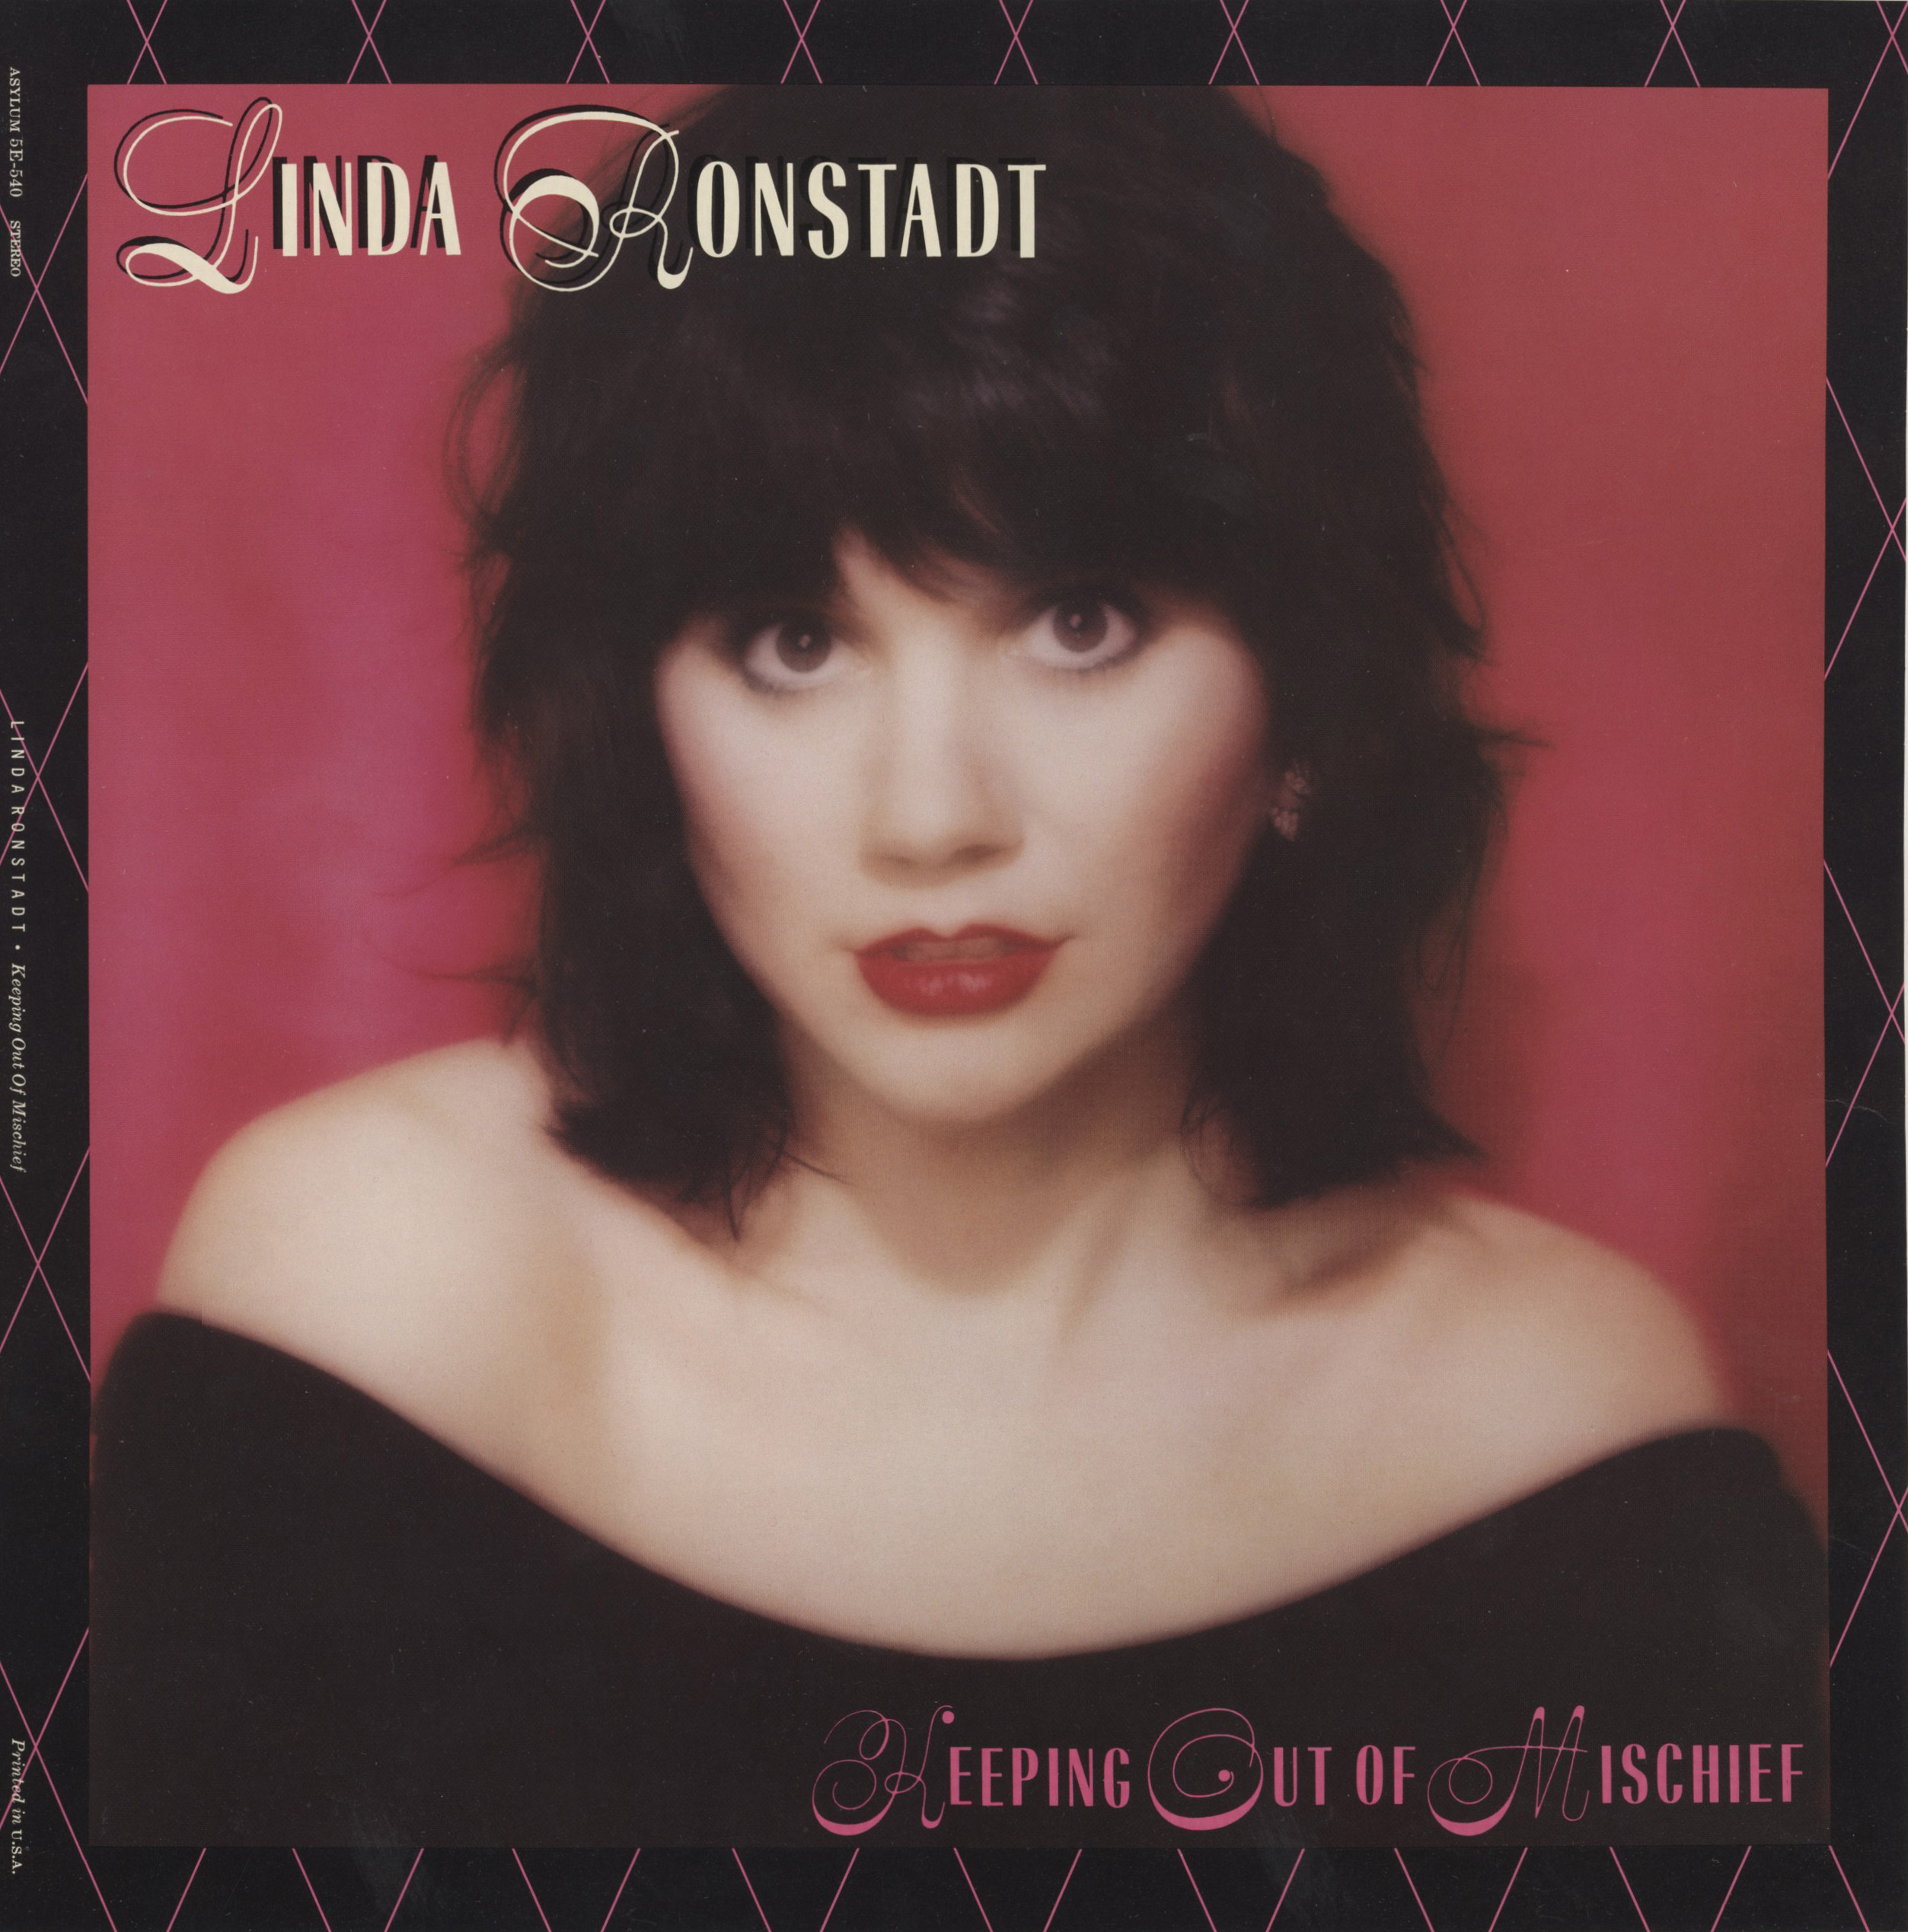 Linda Ronstadt Keeping Out of Mischief front cover